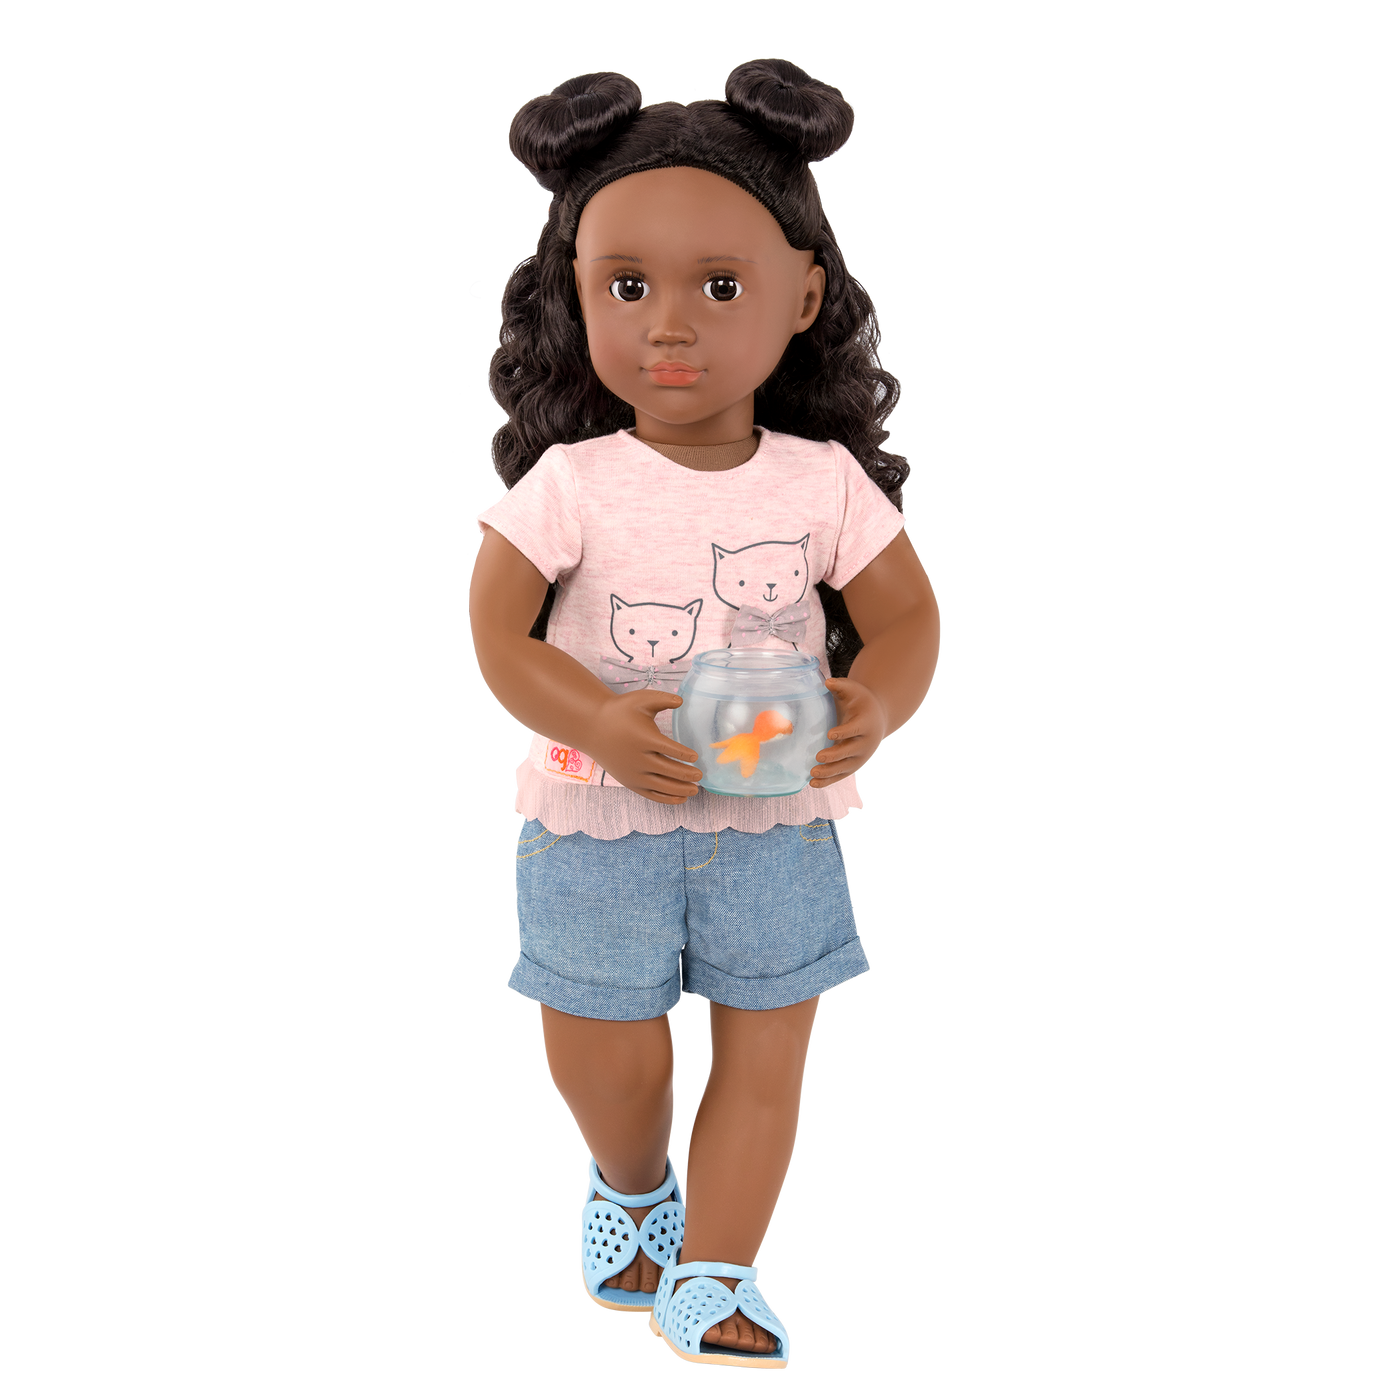 Cat-themed outfit with fish bowl and accessories for 18-inch doll